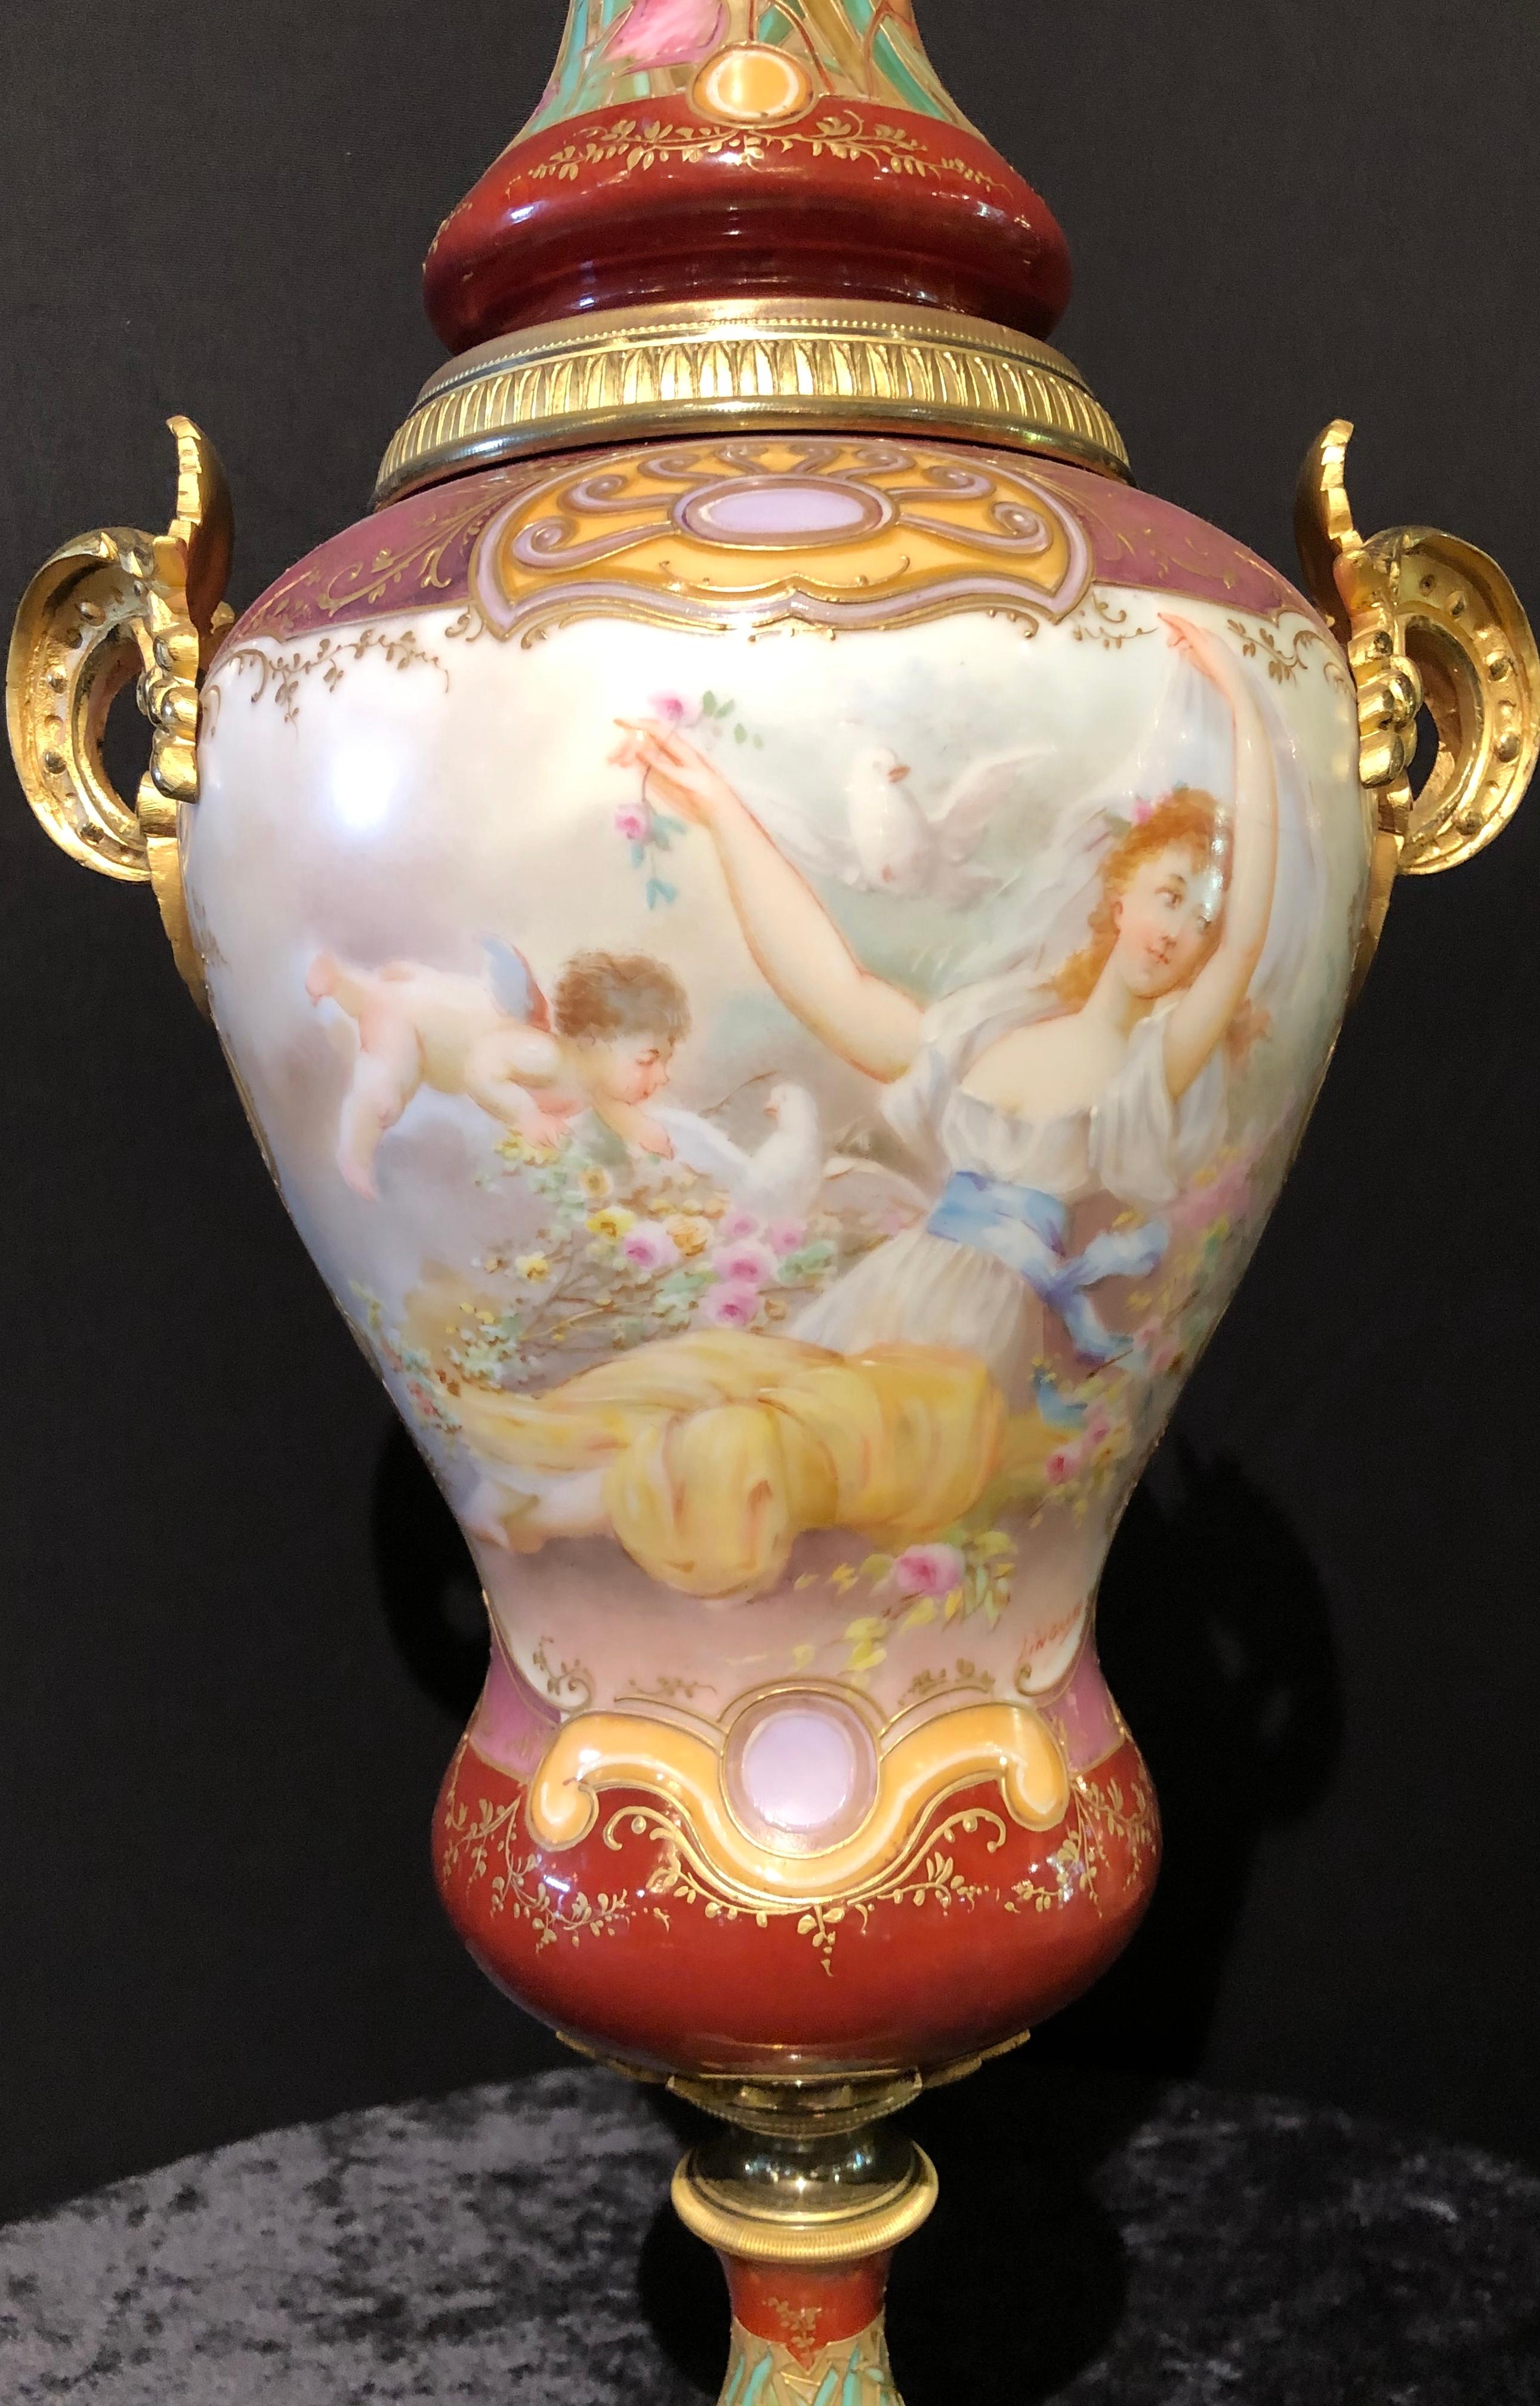 Belle Époque Sevres Spinning Urn Vase Having a Maiden & Cherub Painting Signed Lingaand For Sale